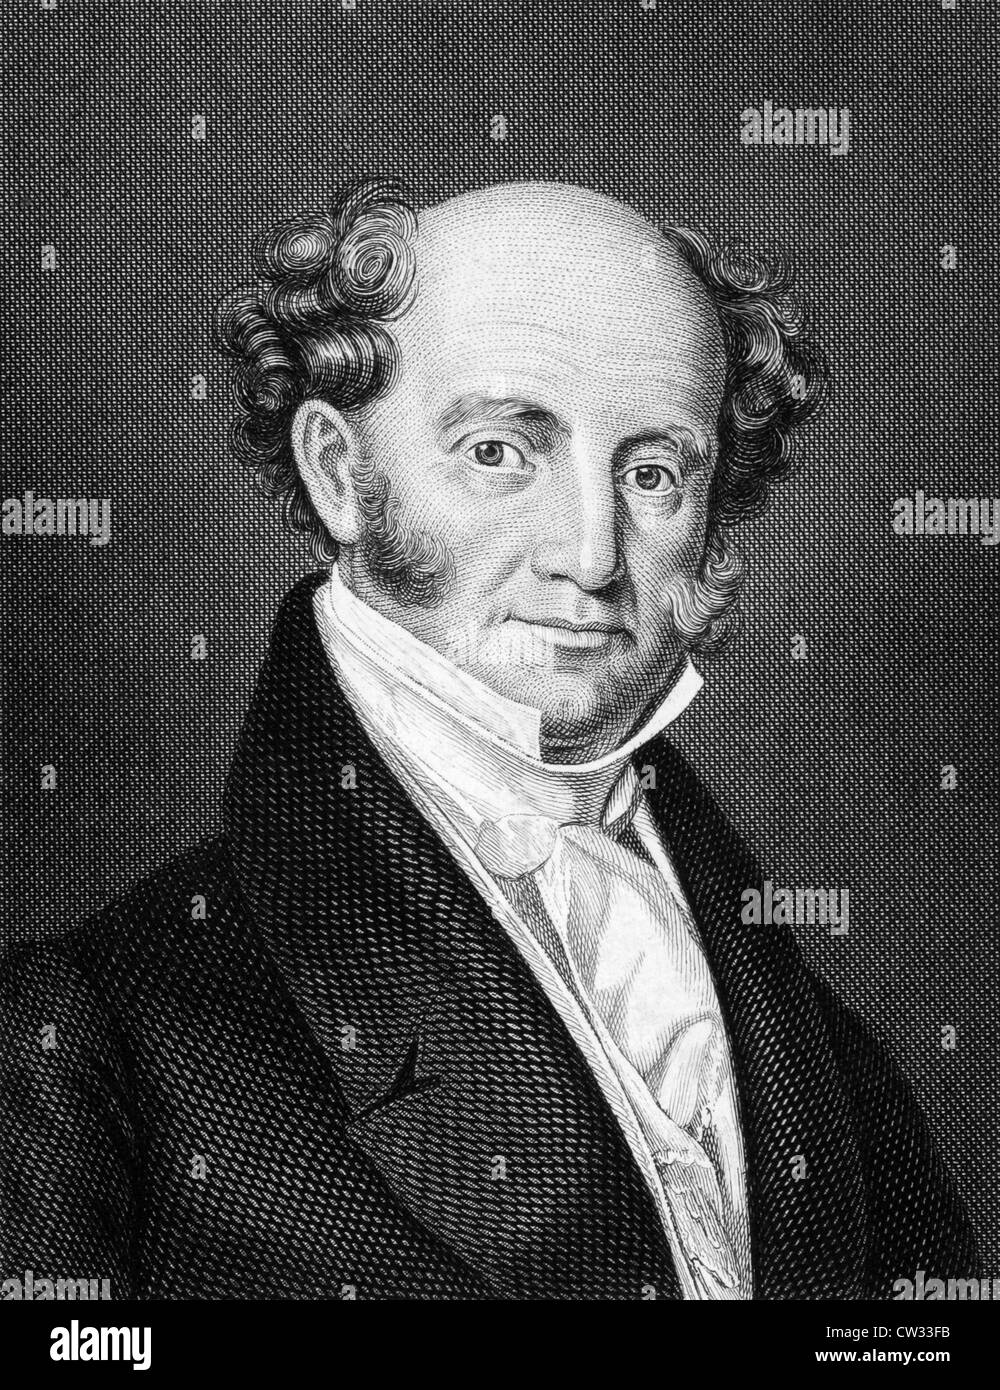 Martin Van Buren (1782-1862) on engraving from 1859. 8th President of the United States during 1837-1841. Stock Photo